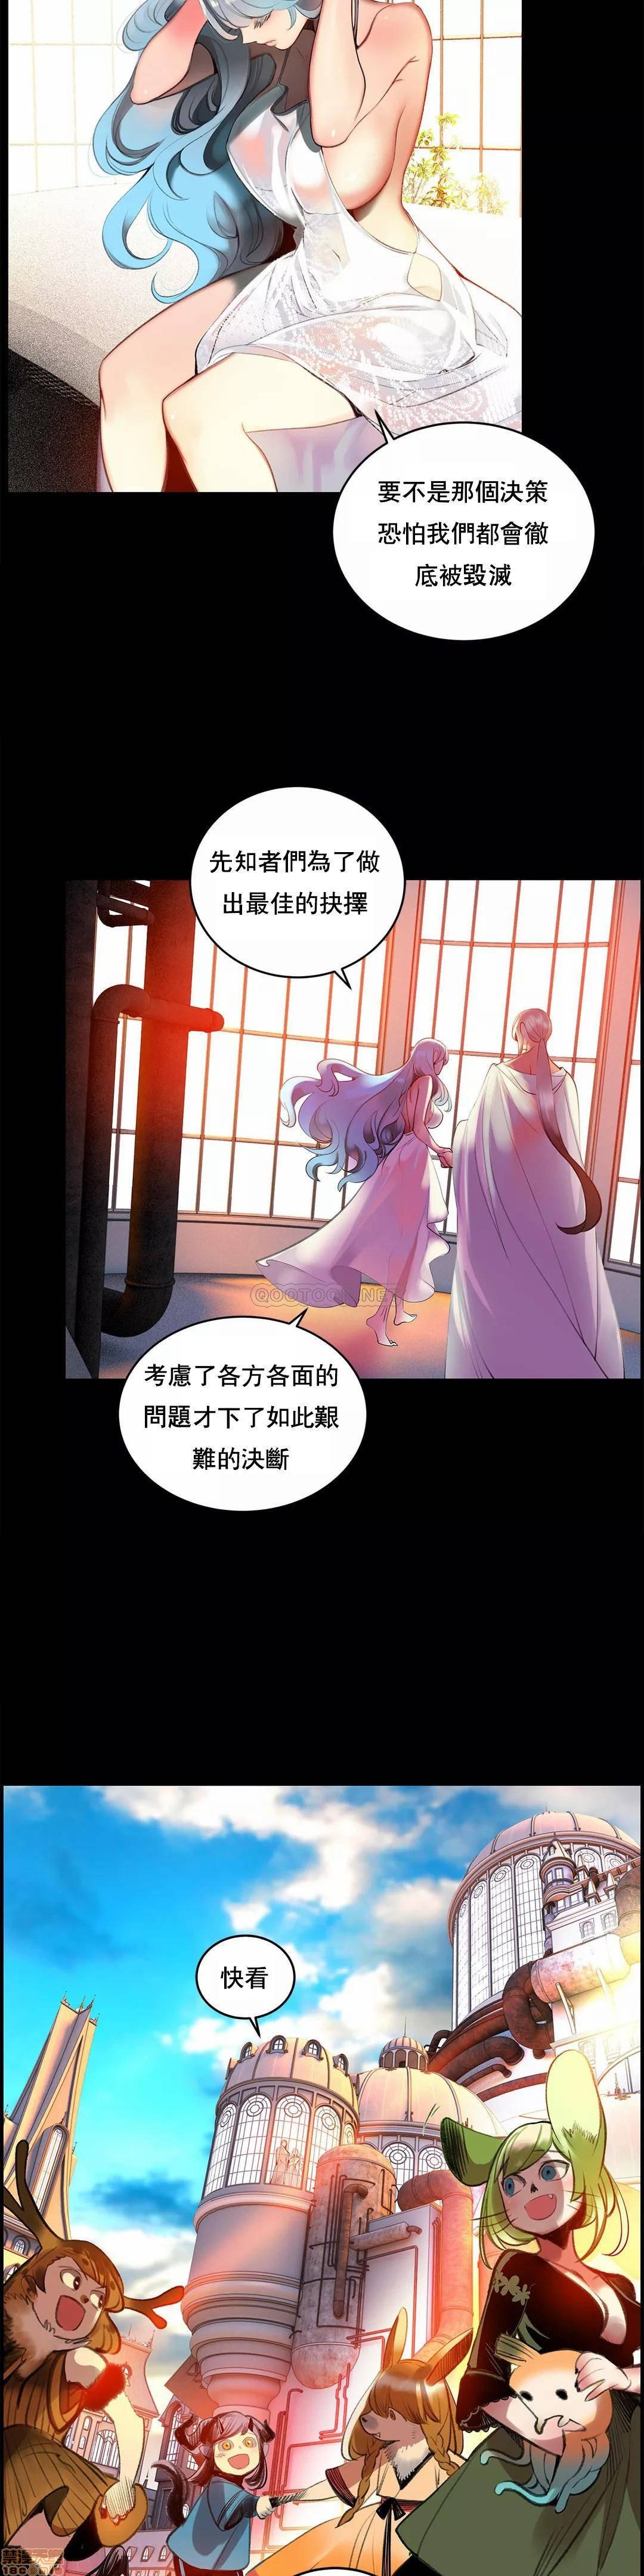 [Juder] Lilith`s Cord (第二季) Ch.77-93 end [Chinese] 95